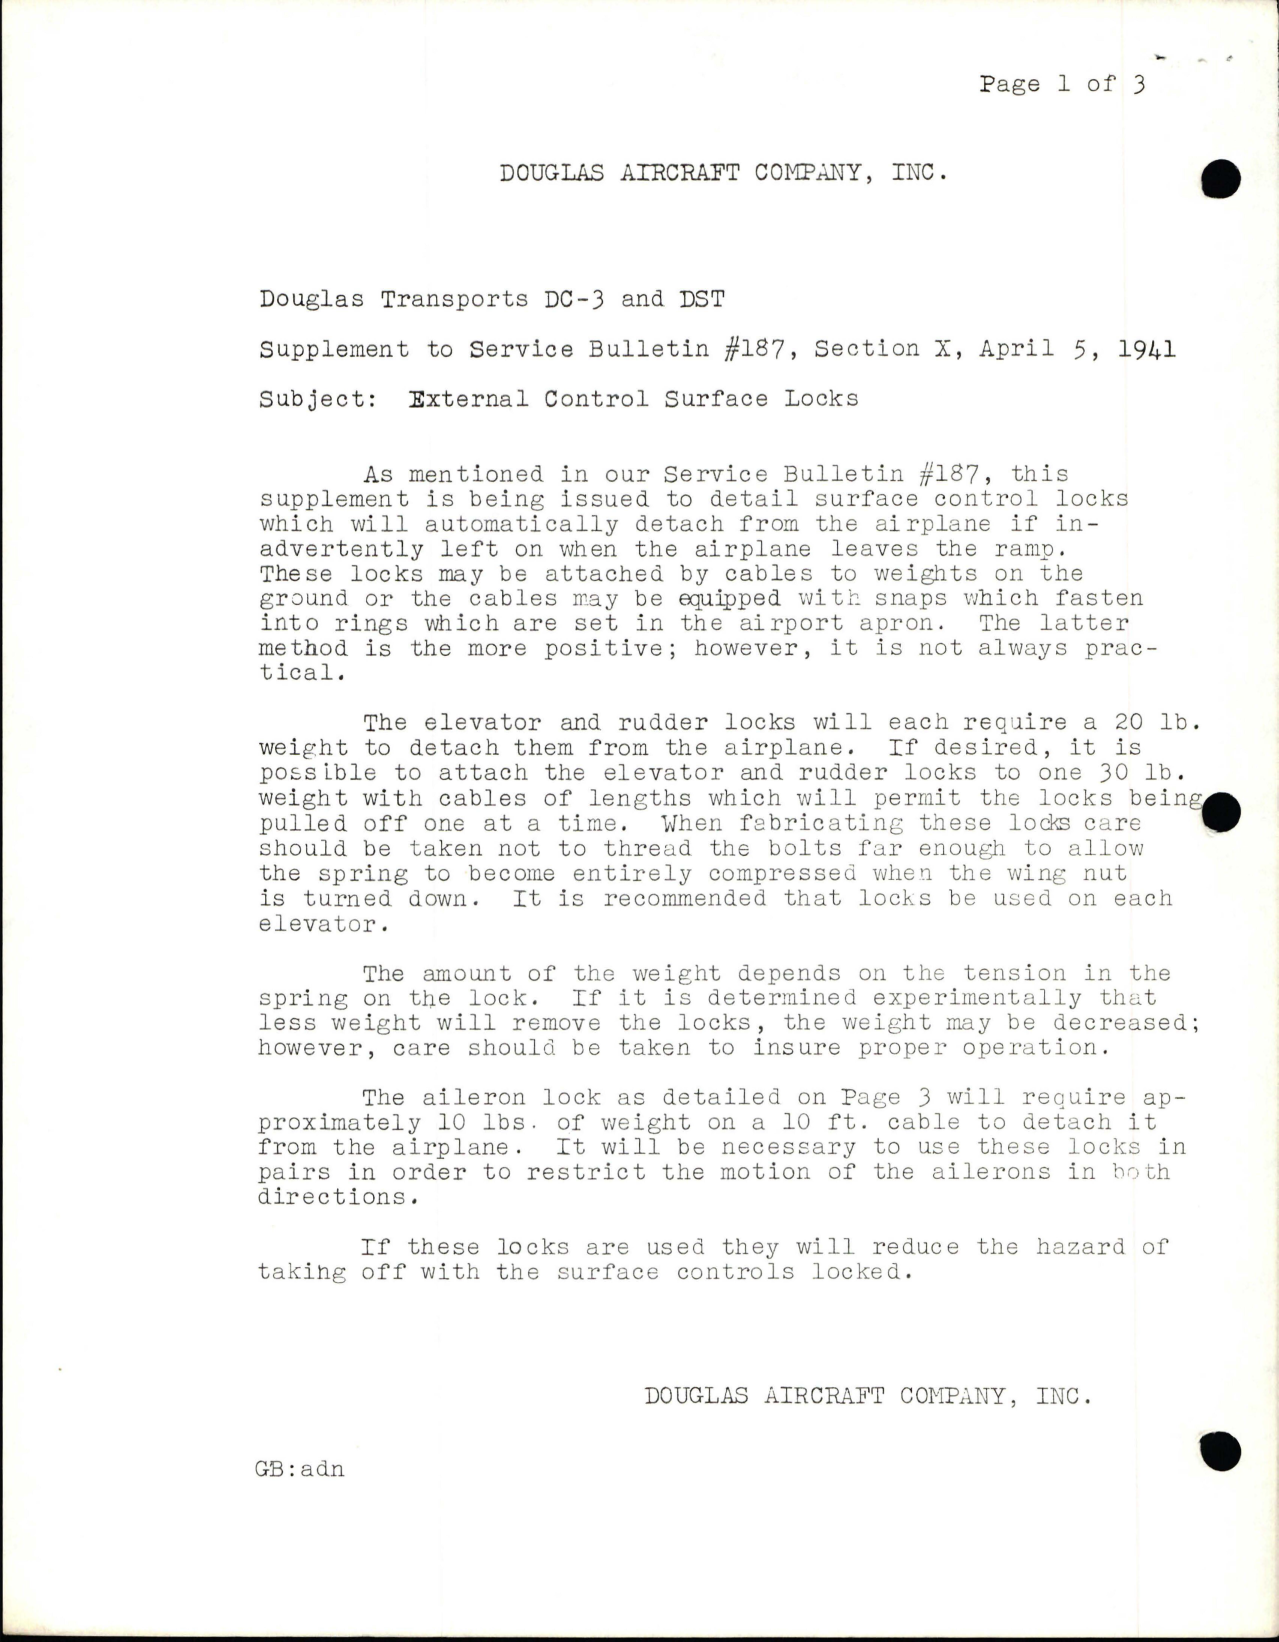 Sample page 1 from AirCorps Library document: External Control Surface Locks